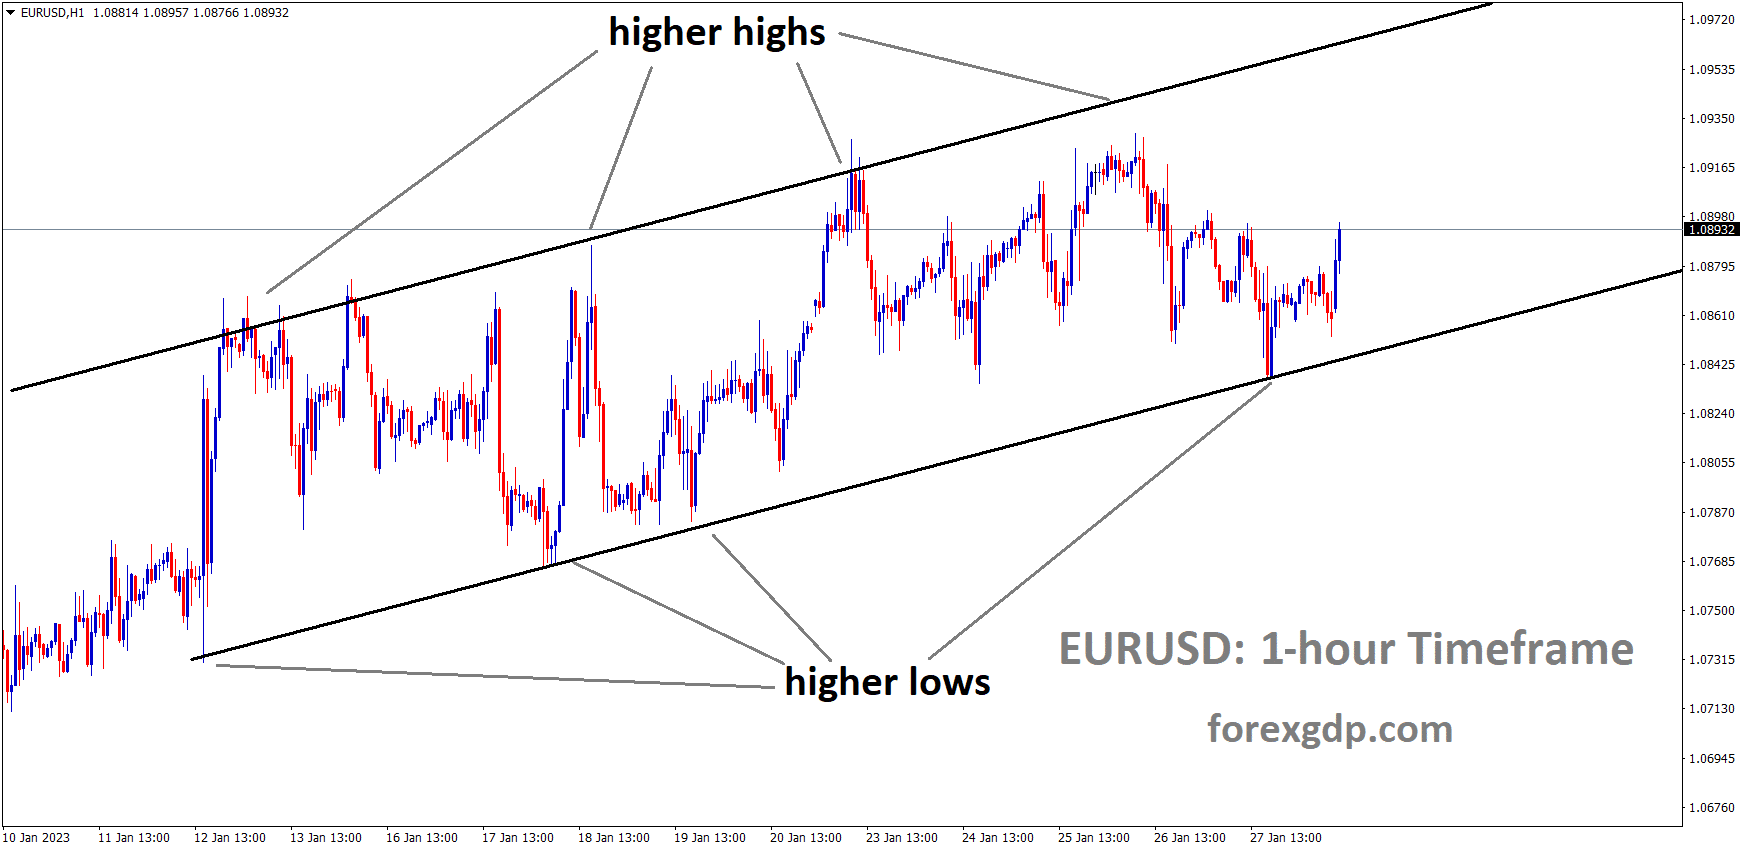 EURUSD is moving in an ascending channel and the market has rebounded from the higher low area of the channel 3